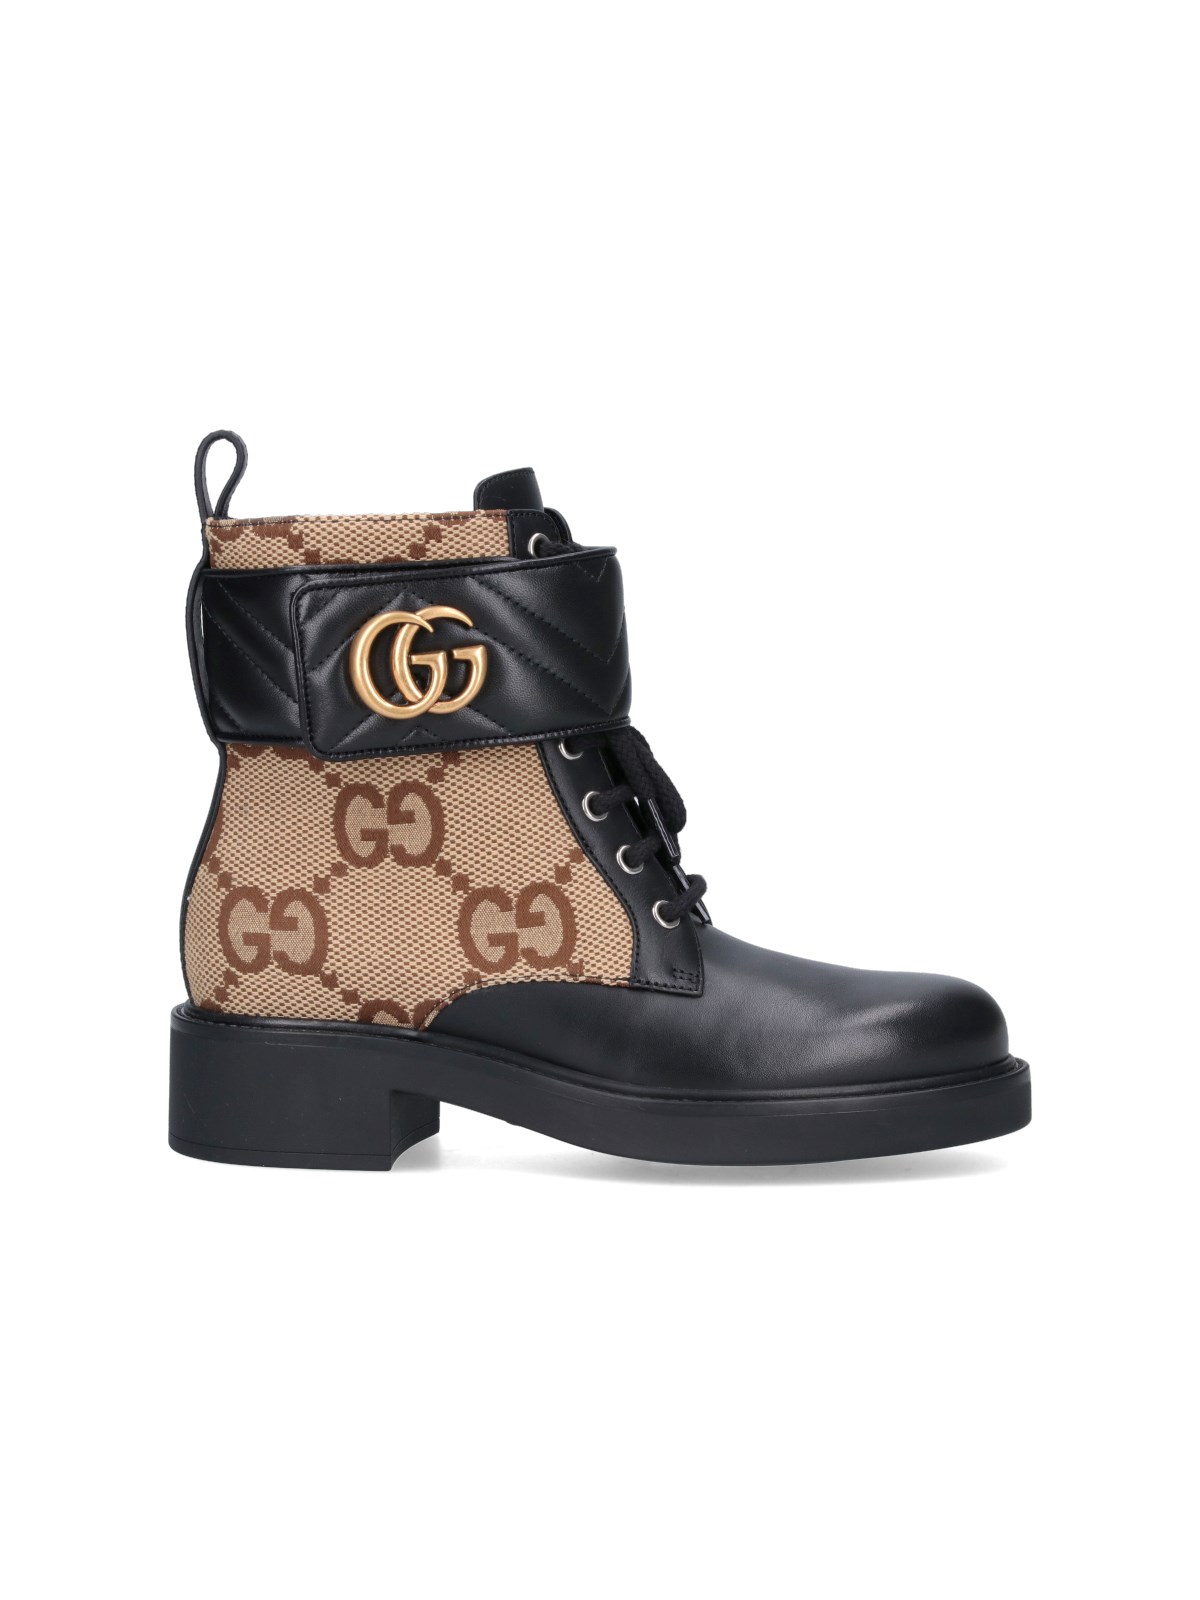 Men's GG lace-up boot